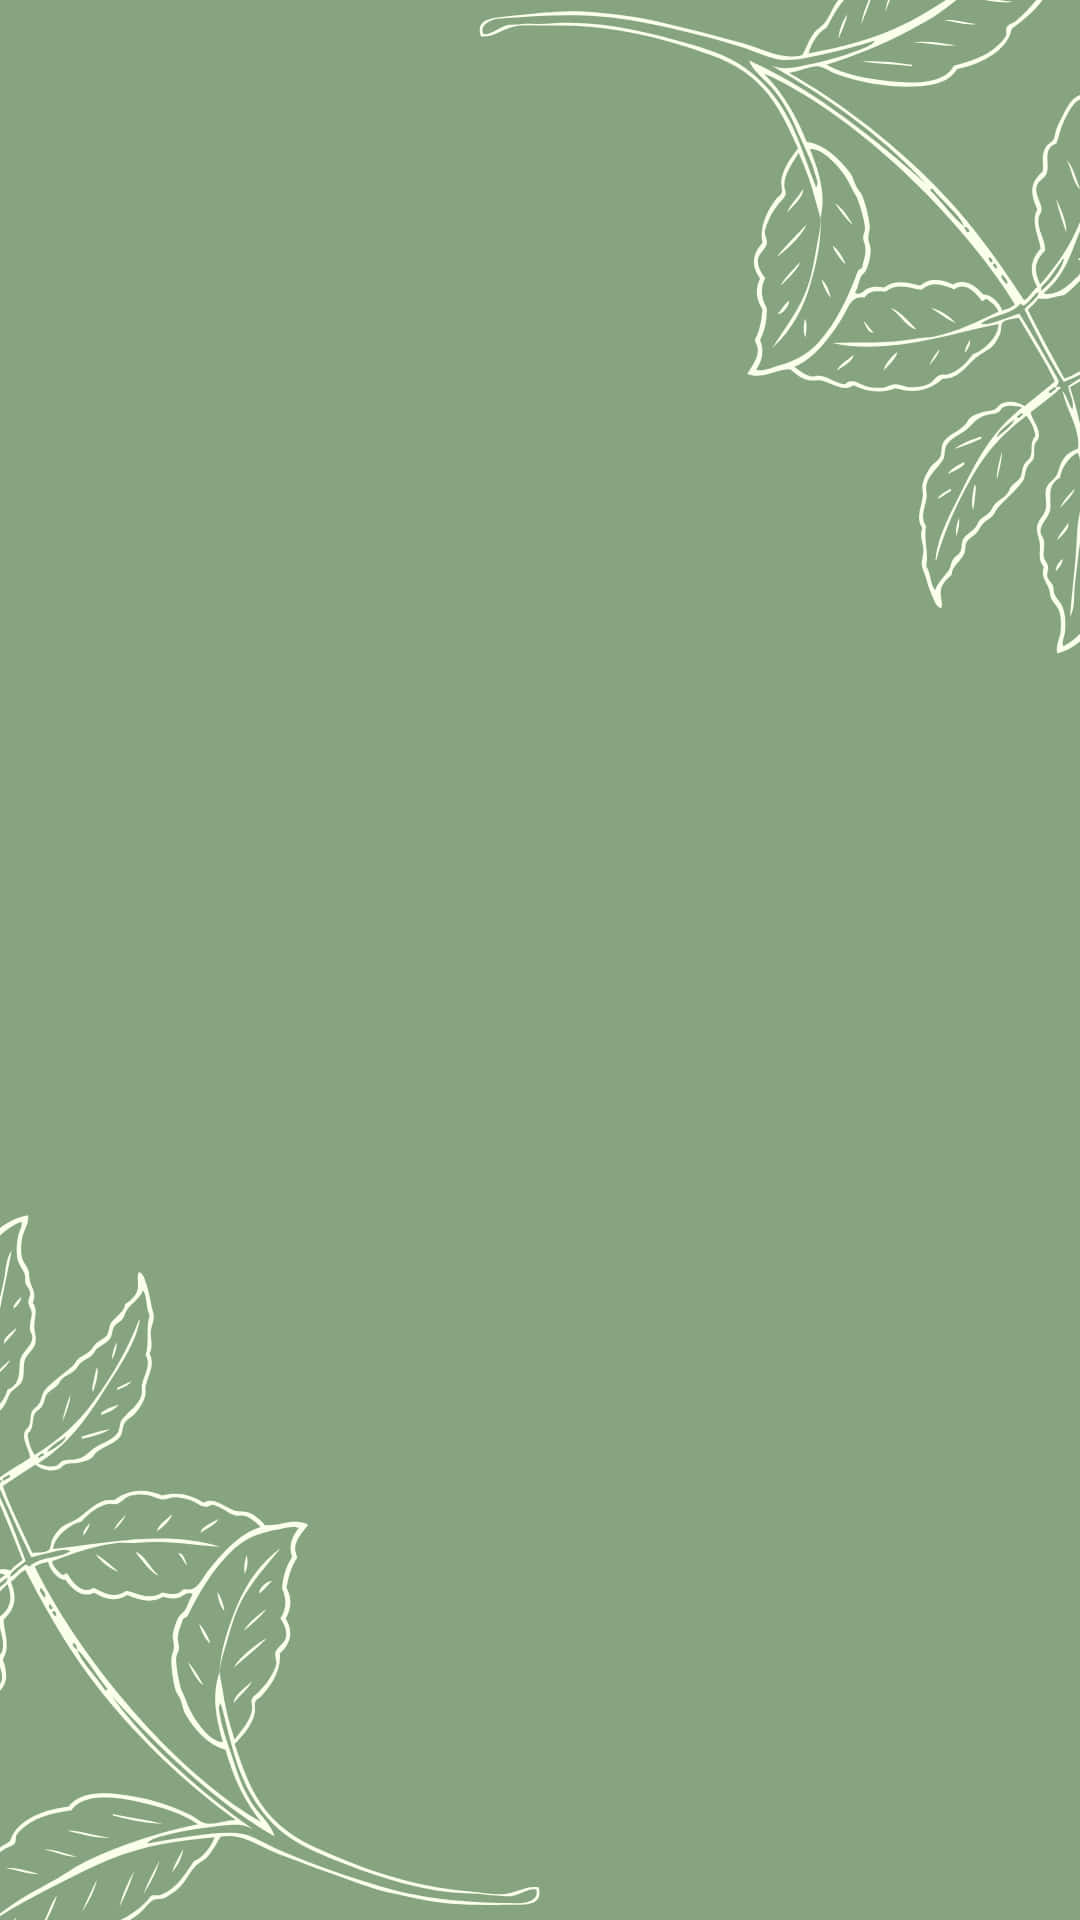 Ig Story Background Doodle Of Plants With A Green Backdrop